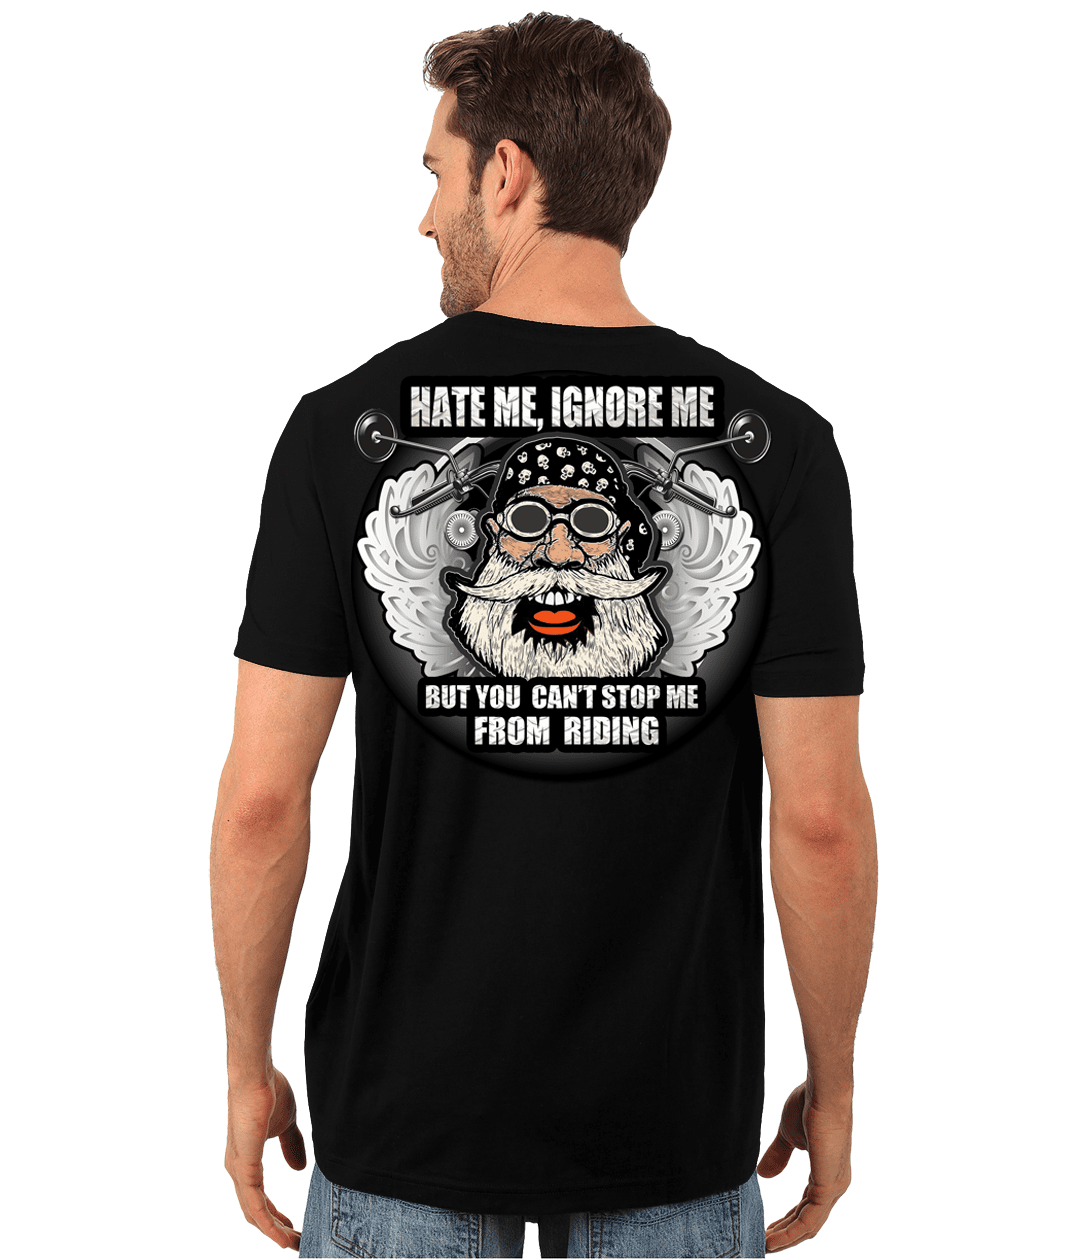 You Can't Stop Me From Riding T-Shirt - American Legend Rider